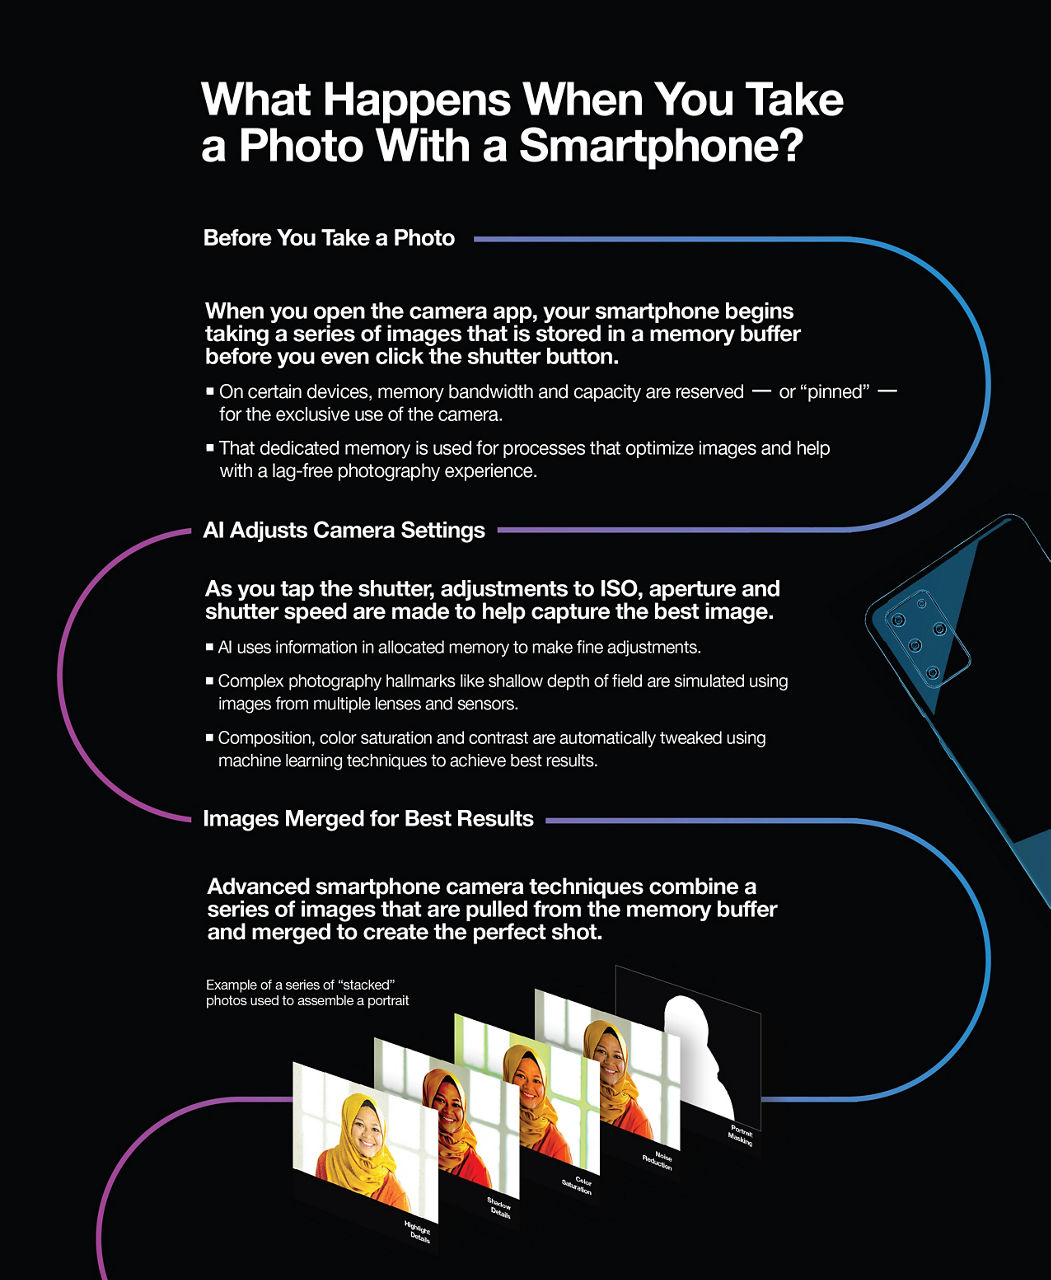 Infographic: What happens when you take a photo with a smartphone